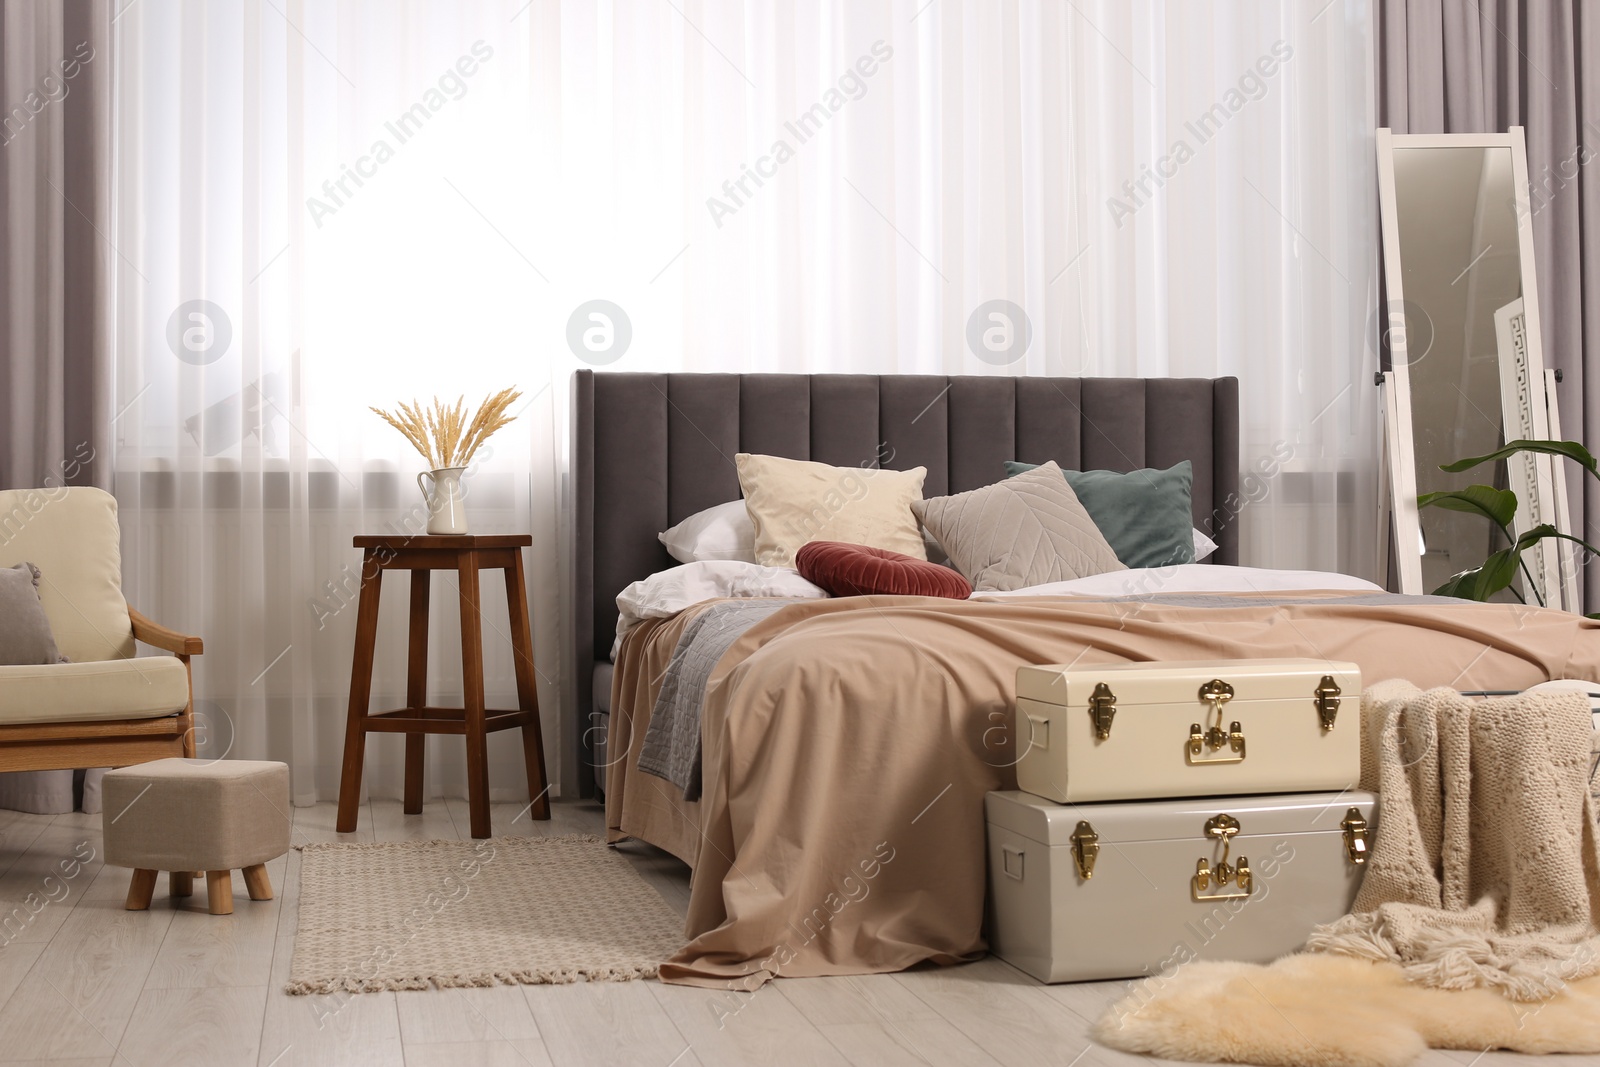 Photo of Large comfortable bed with soft pillows and blankets in room. Home textile